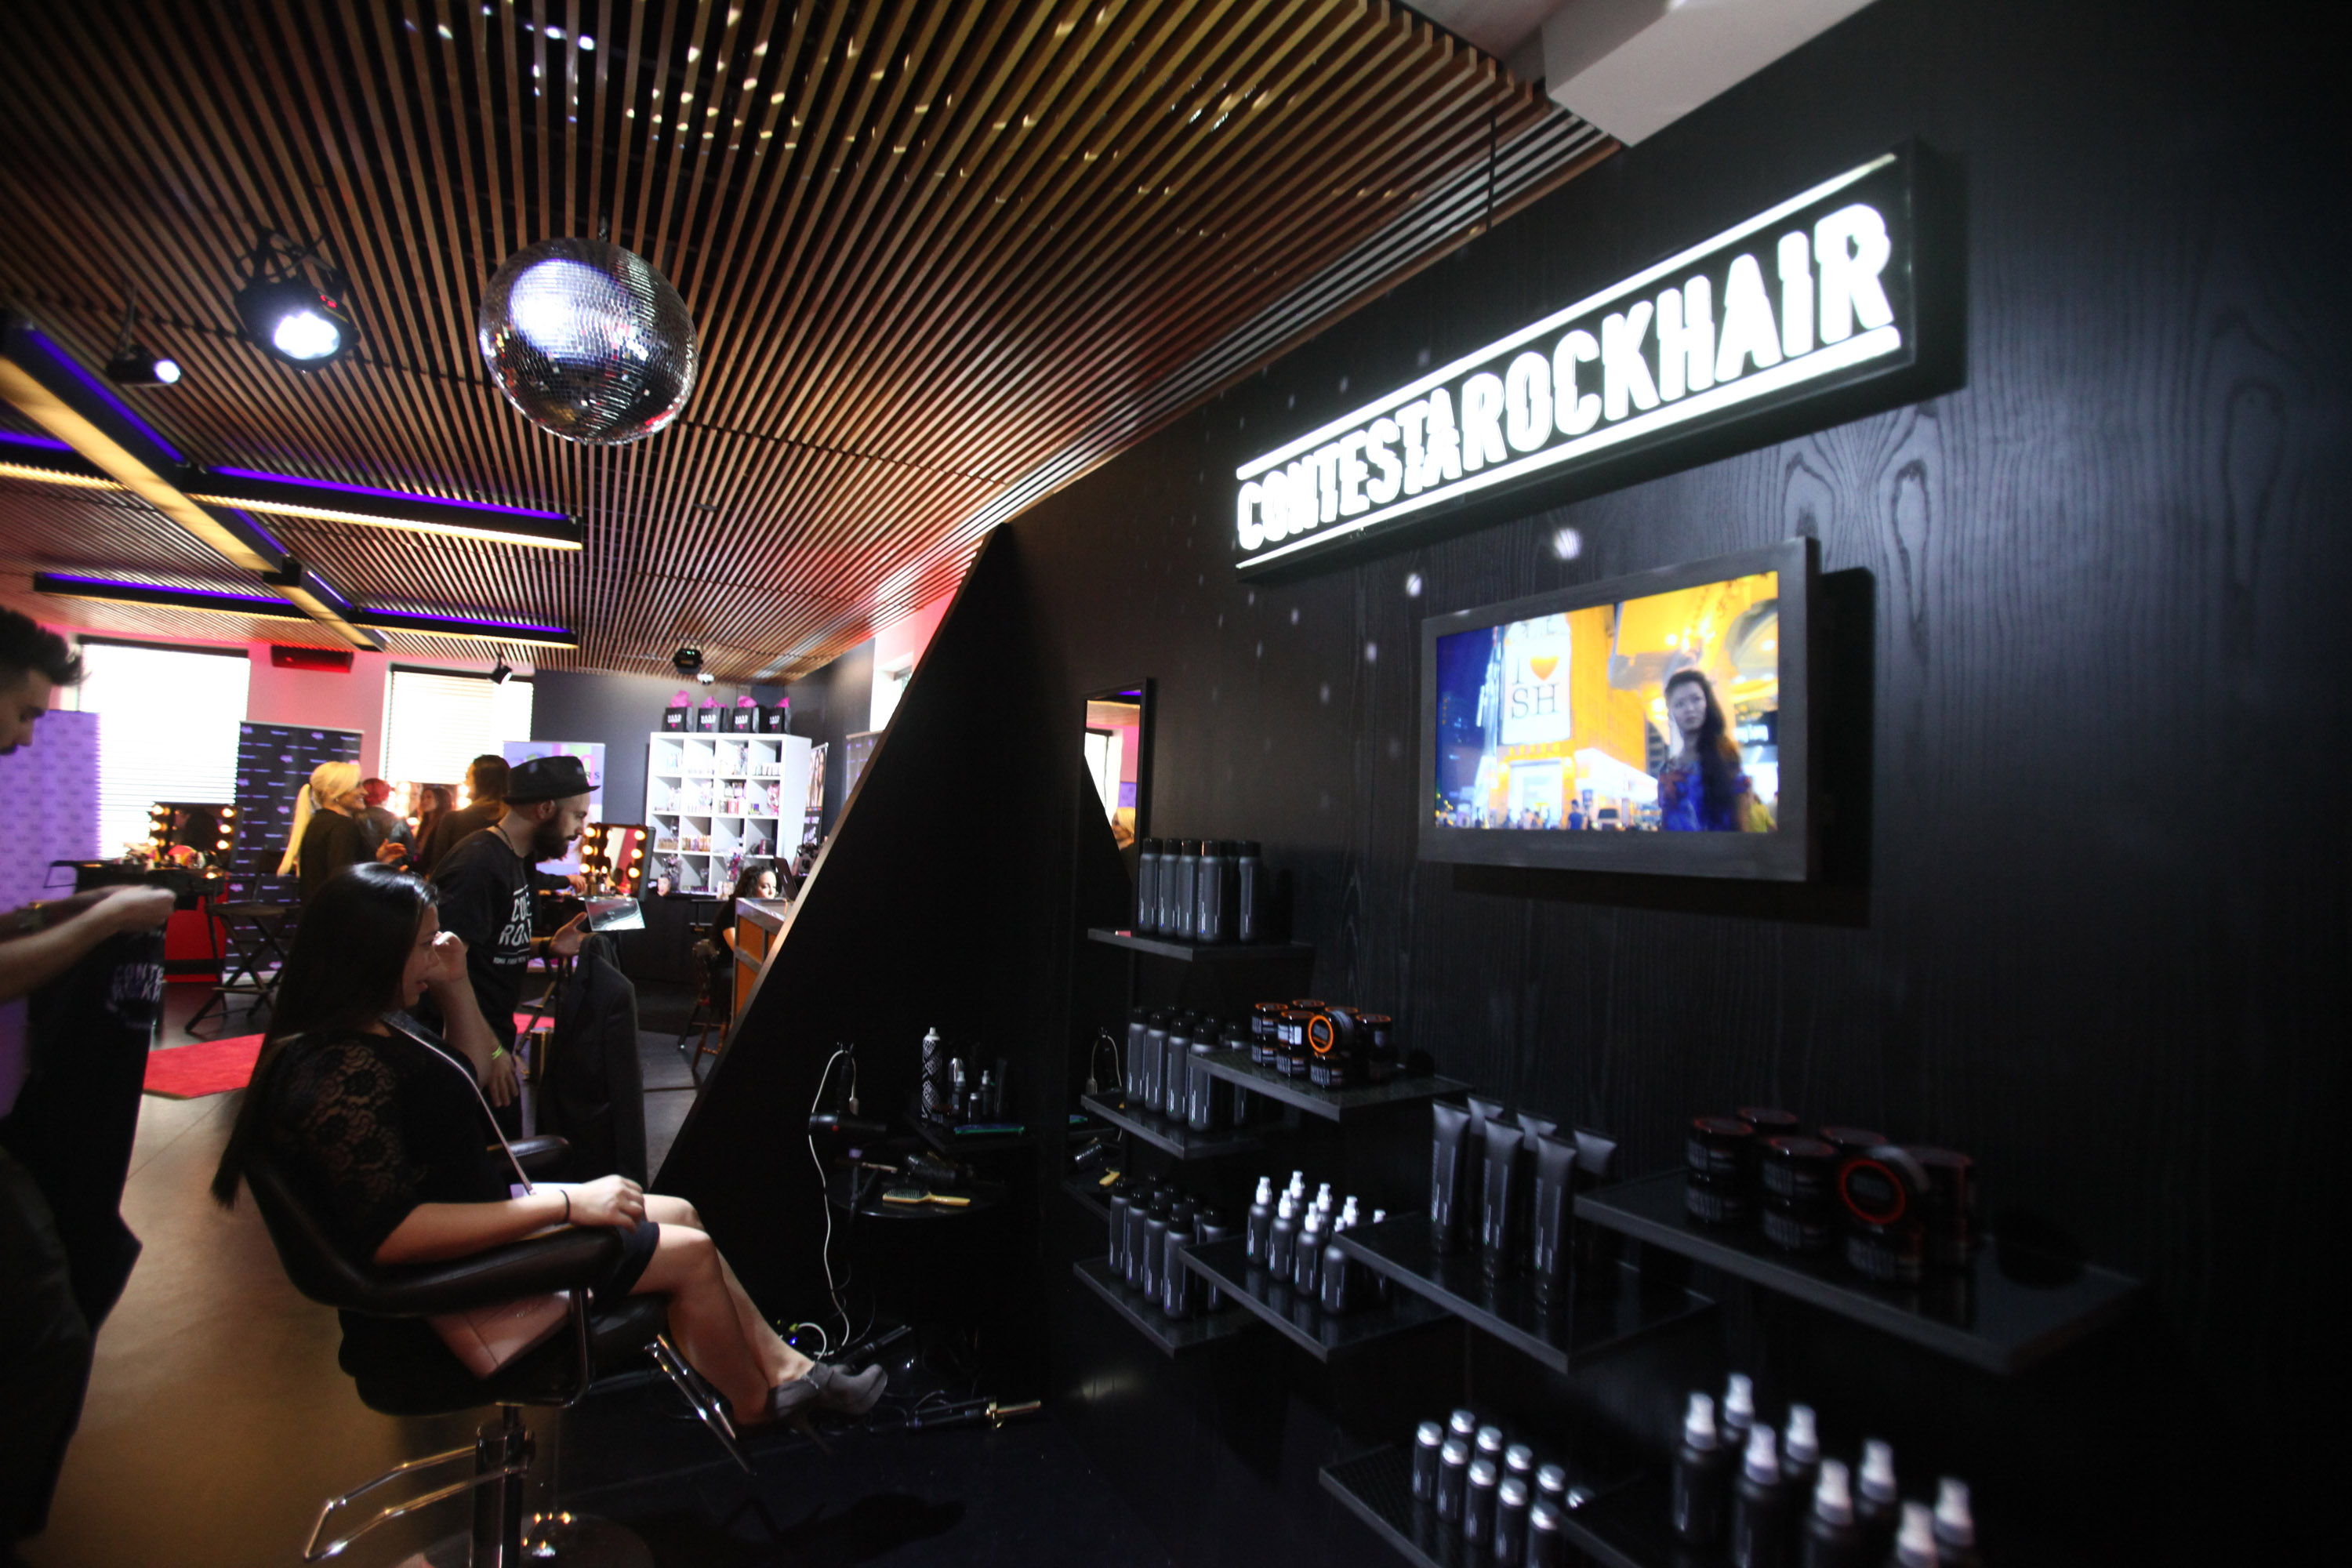 A General View of the Lounge - Contesta Rock Hair Display